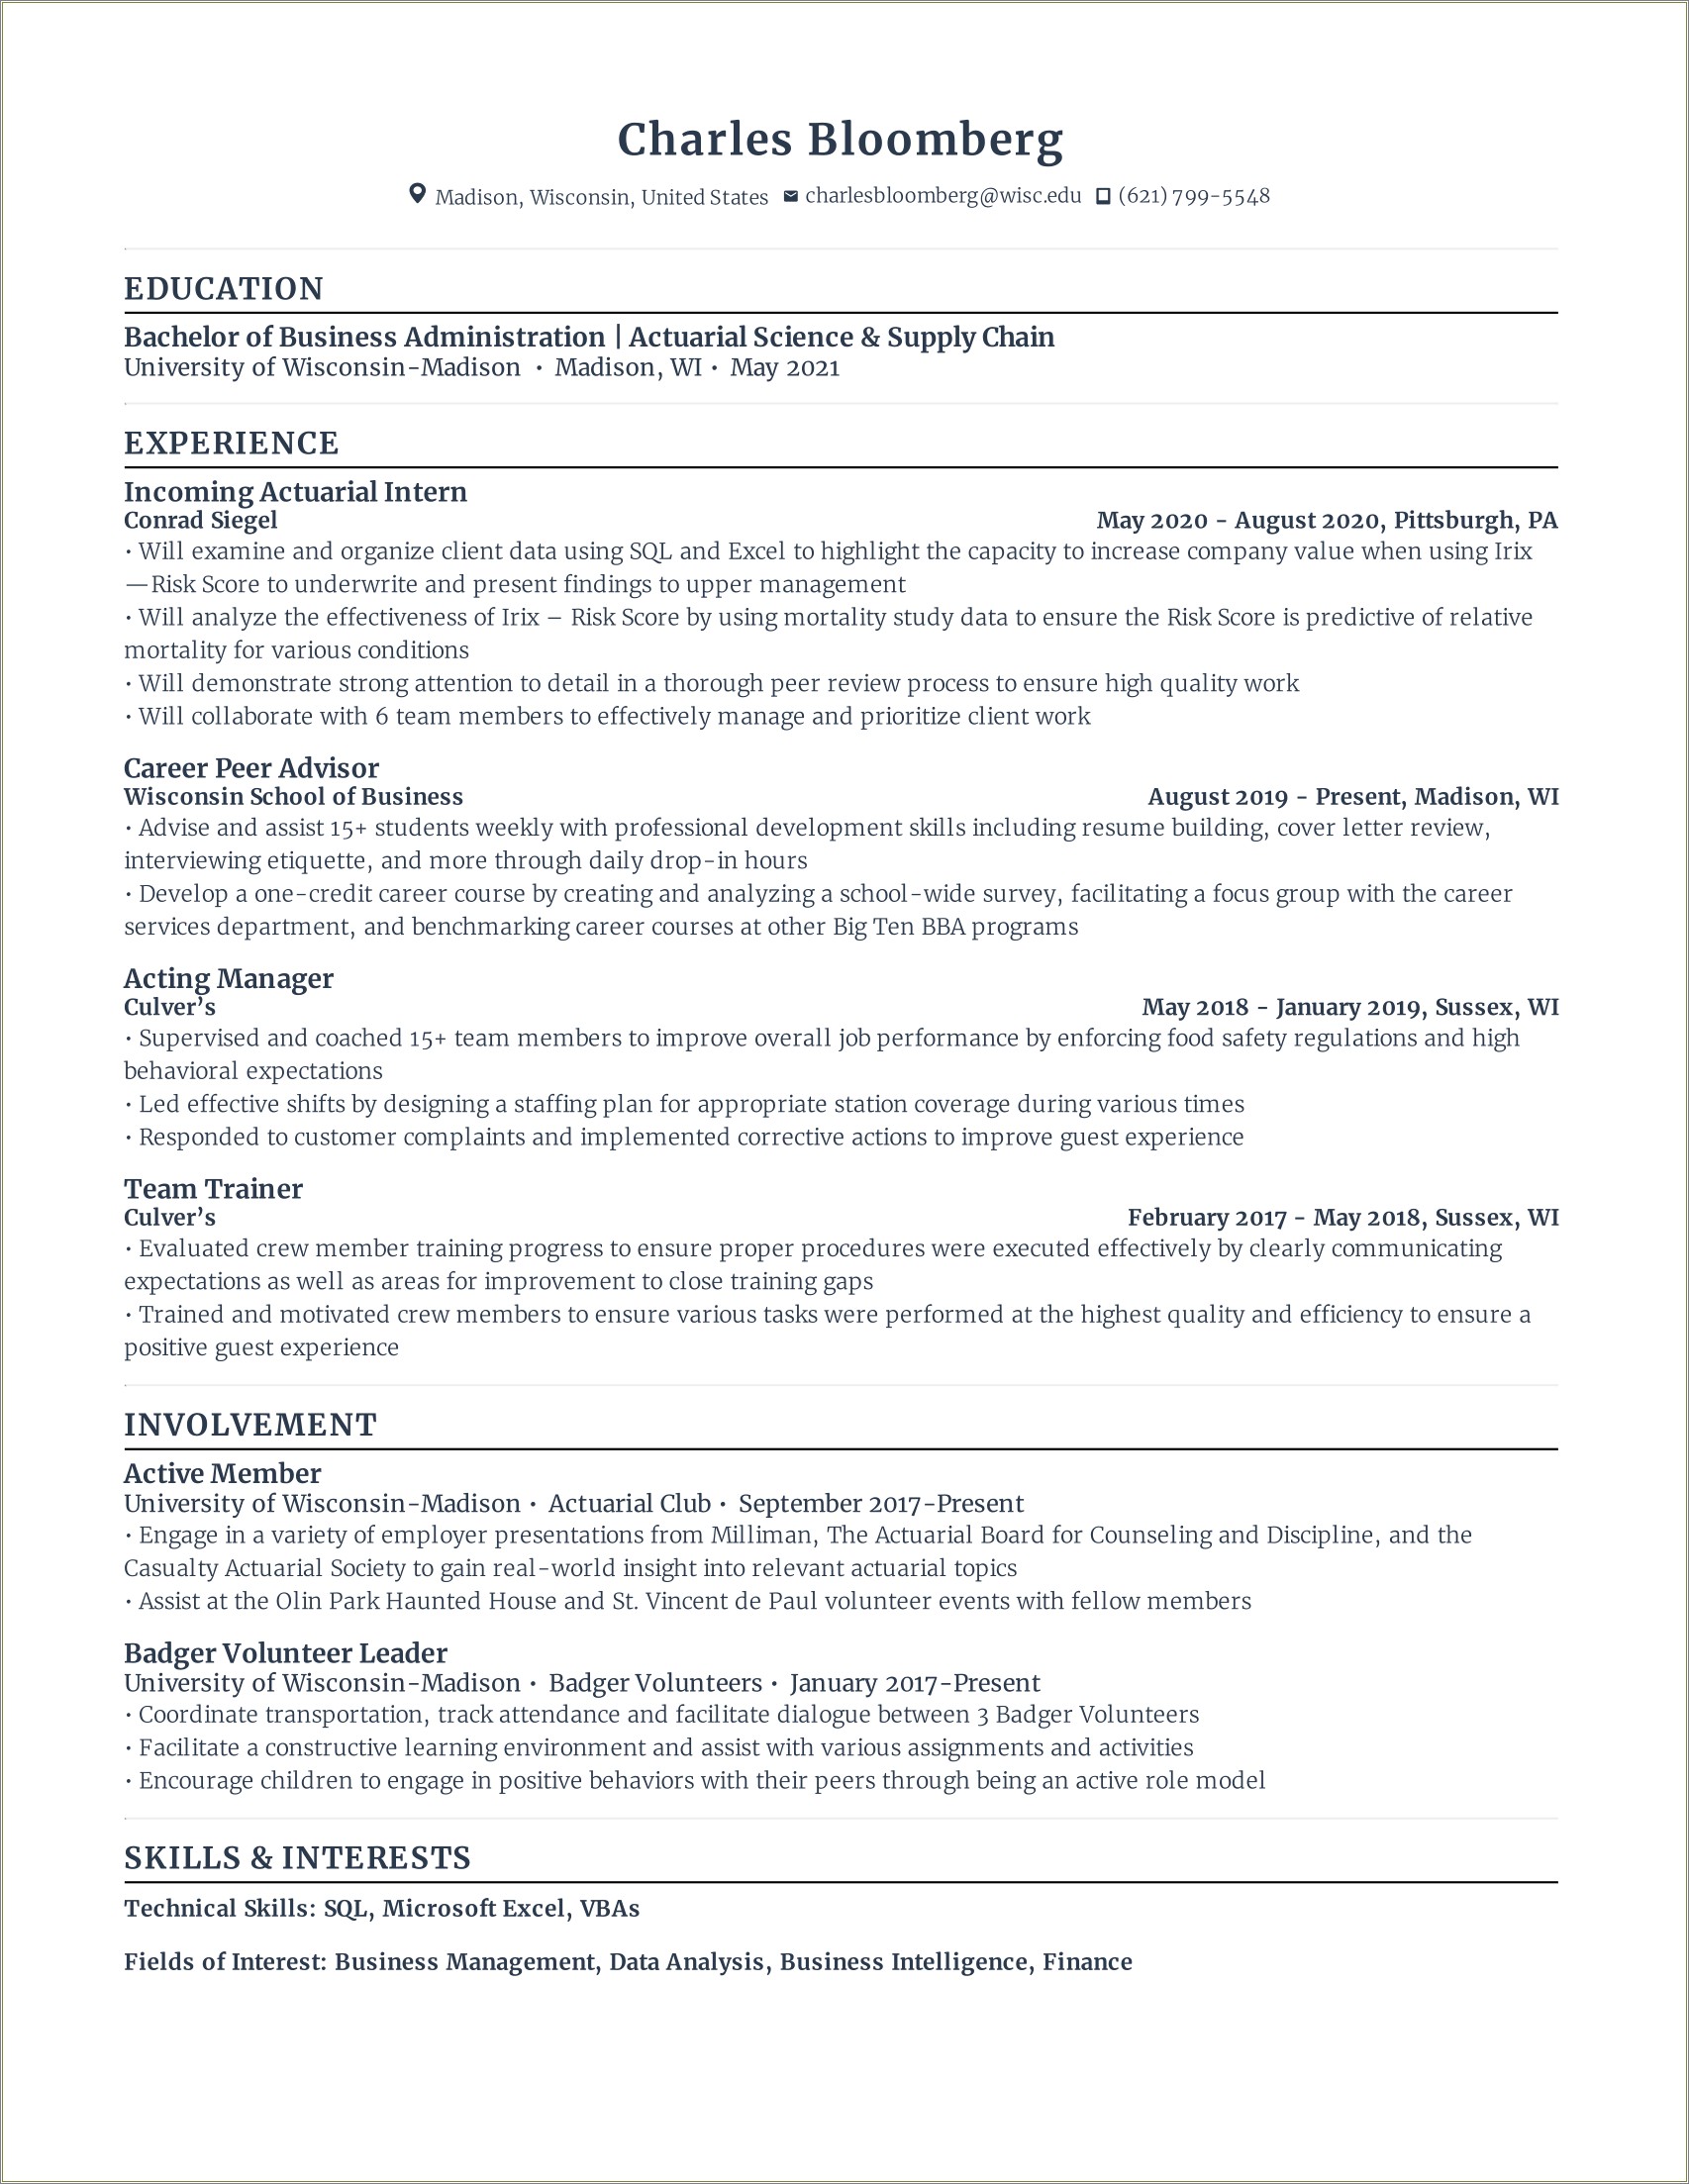 Asset Manager Woman Resume Pdf Portugal